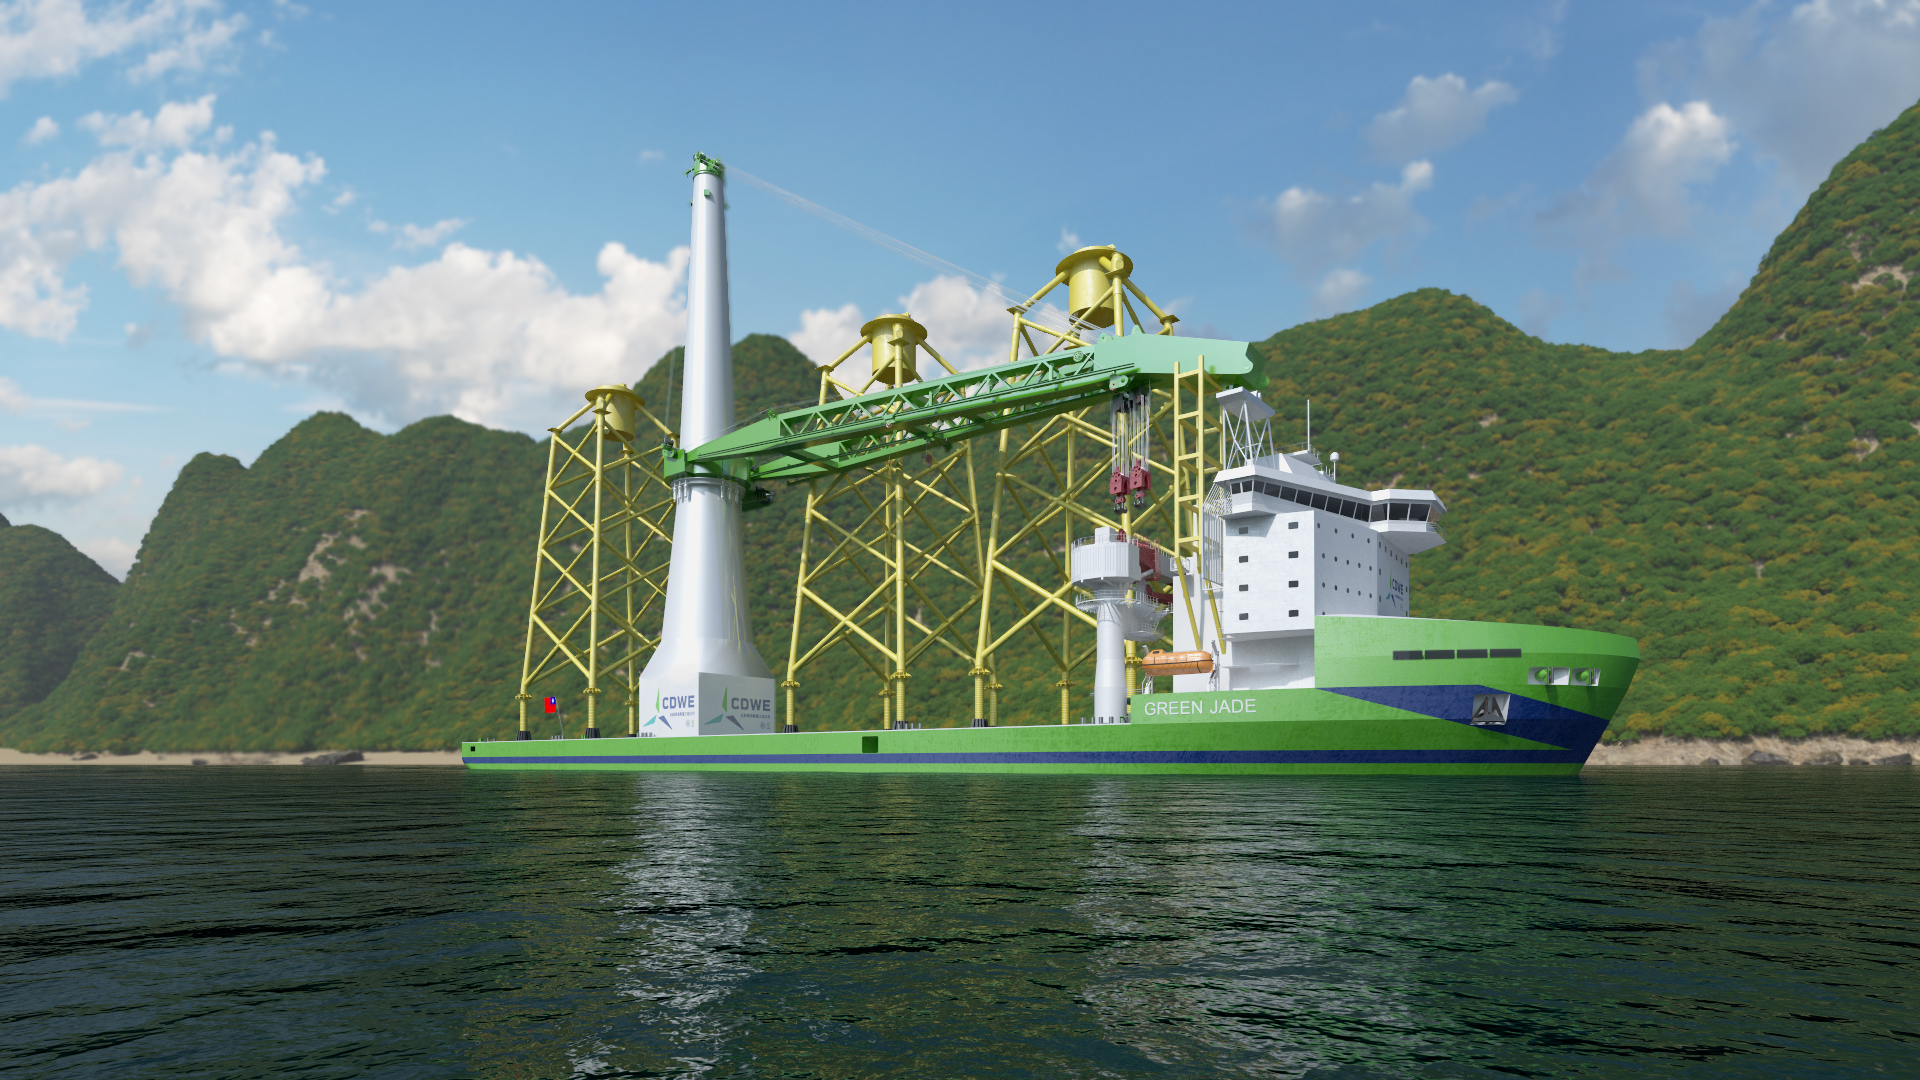 An artist impression of the Green Jade installation vessel in front of a green mountain